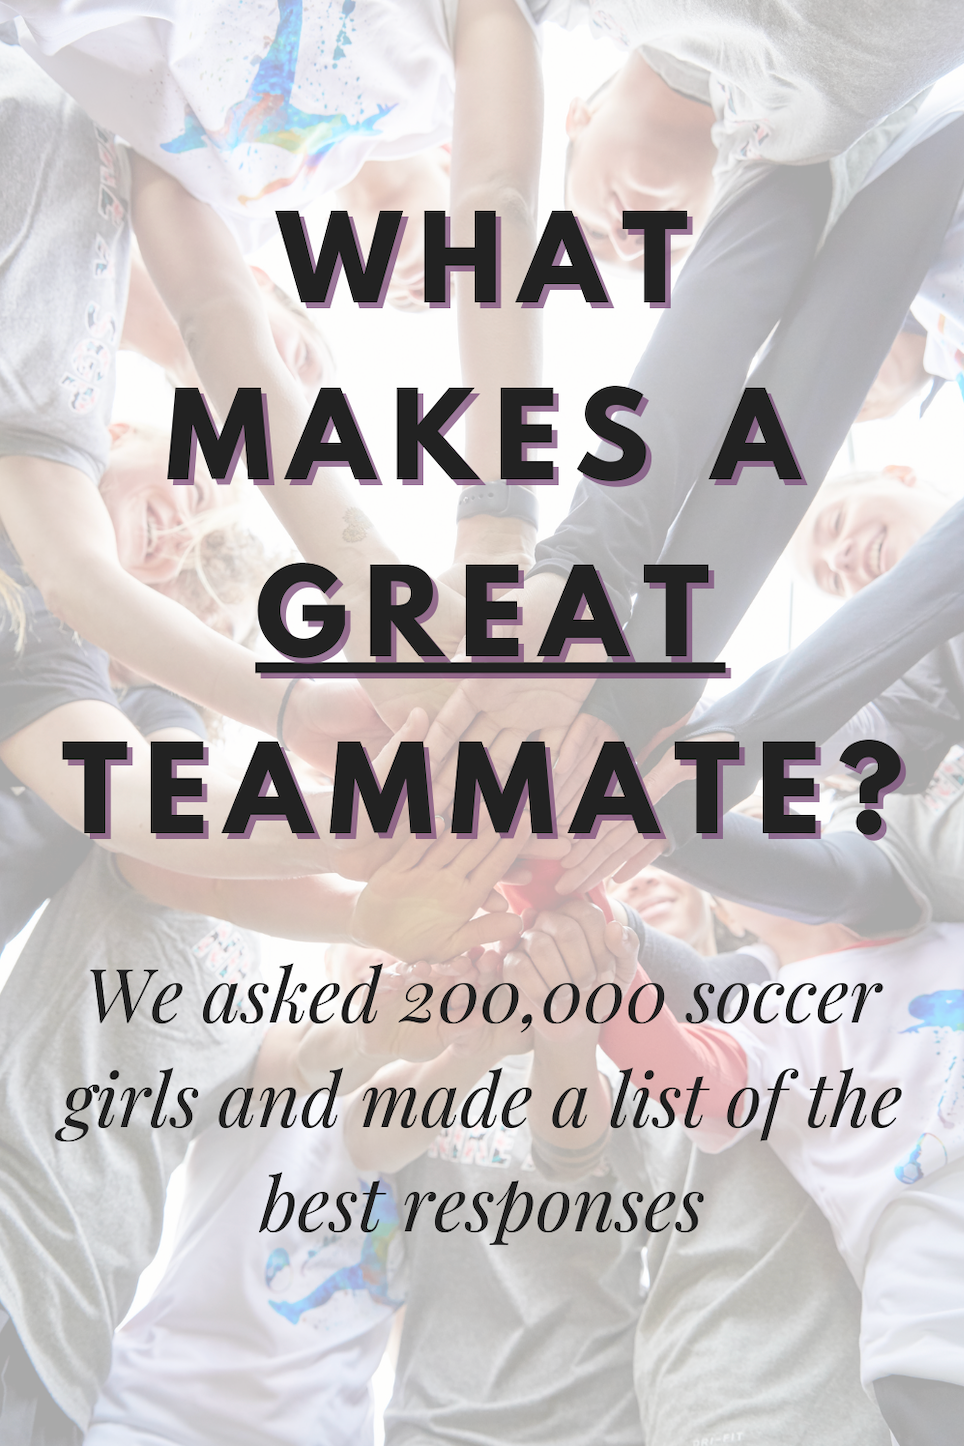 We Surveyed 200,000 Soccer Girls About What Makes A Great Teammate; Here Are The Top Answers